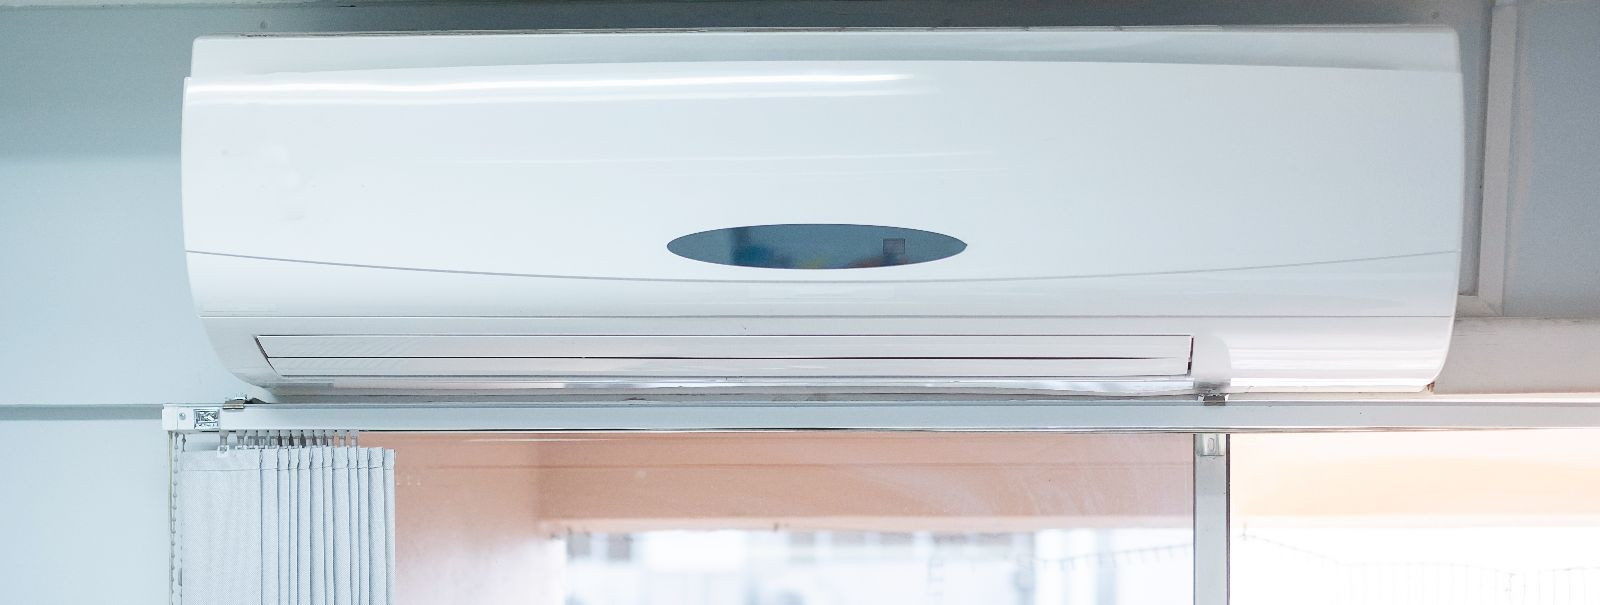 Maintaining your air conditioner is crucial for ensuring it runs efficiently and lasts as long as possible. Regular maintenance can prevent unexpected breakdown